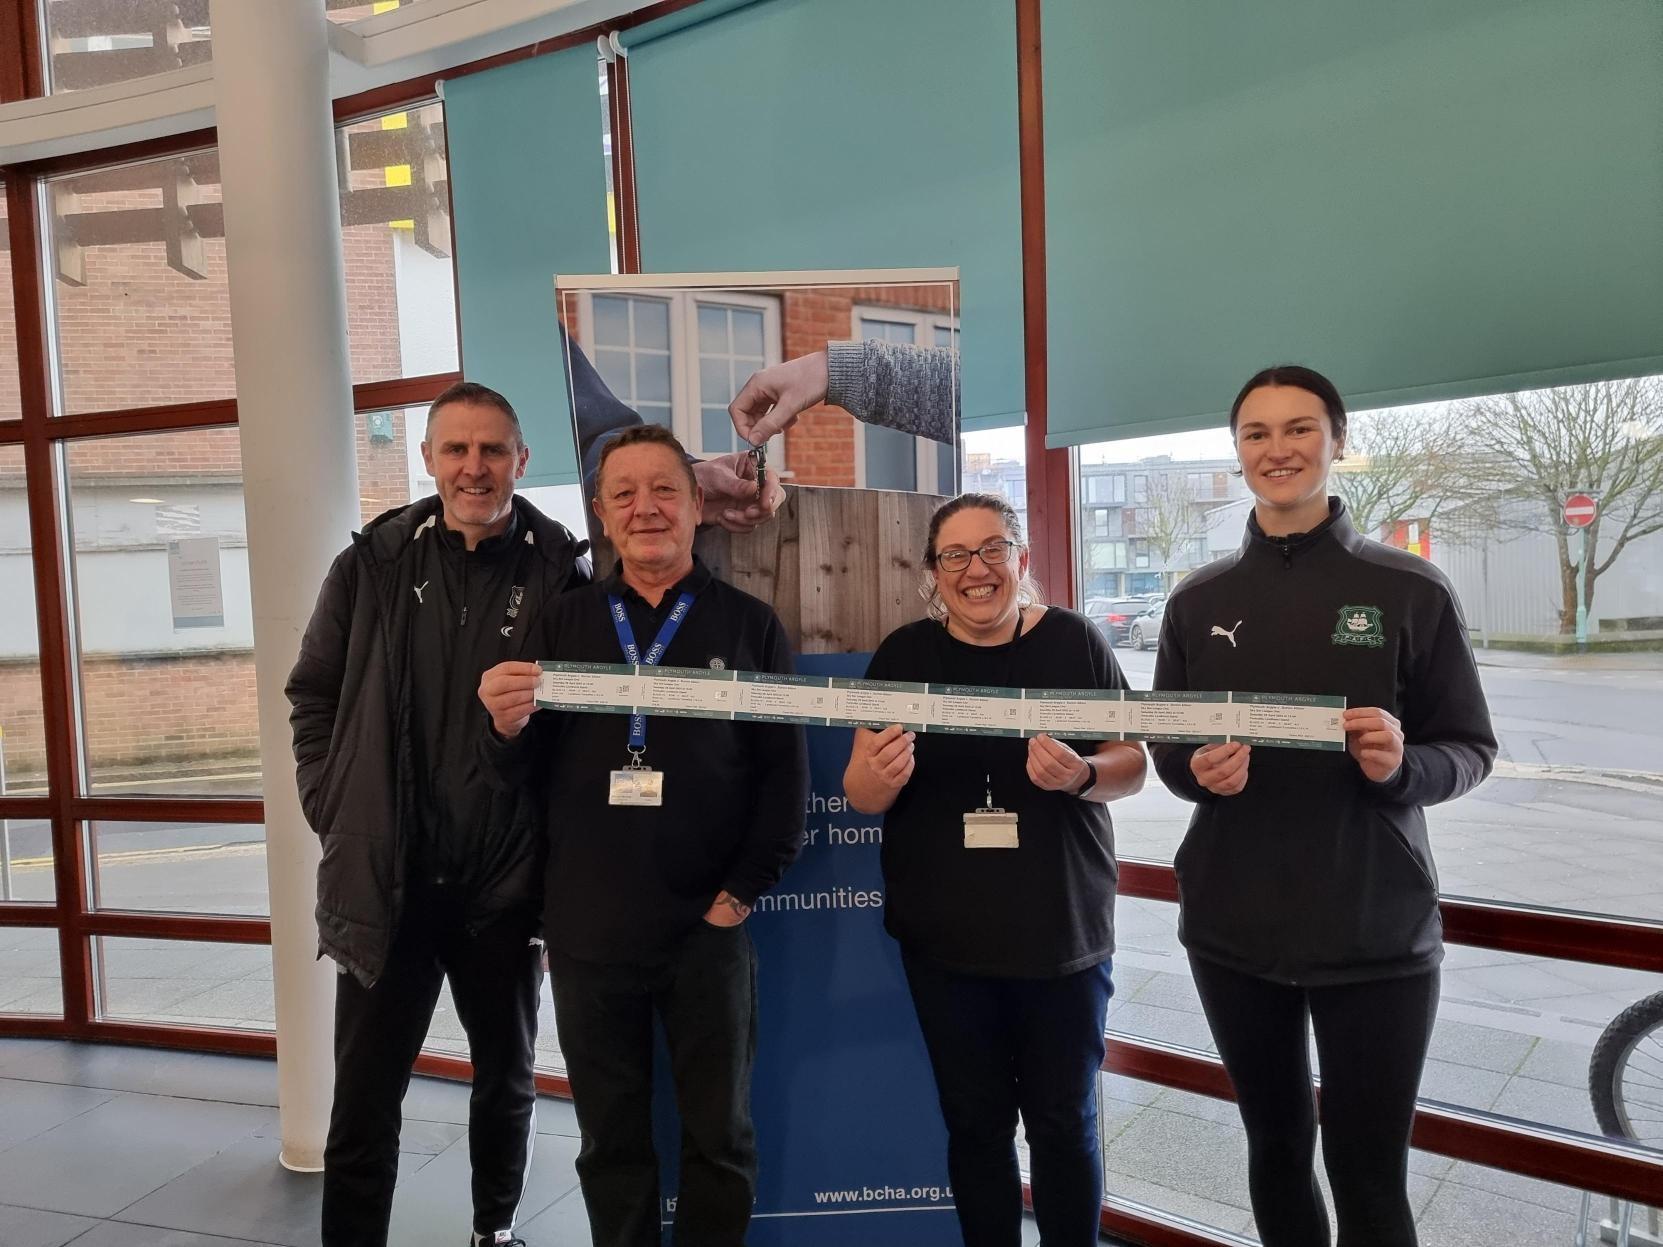 BCHA welcome donations from Plymouth Argyle Community Trust